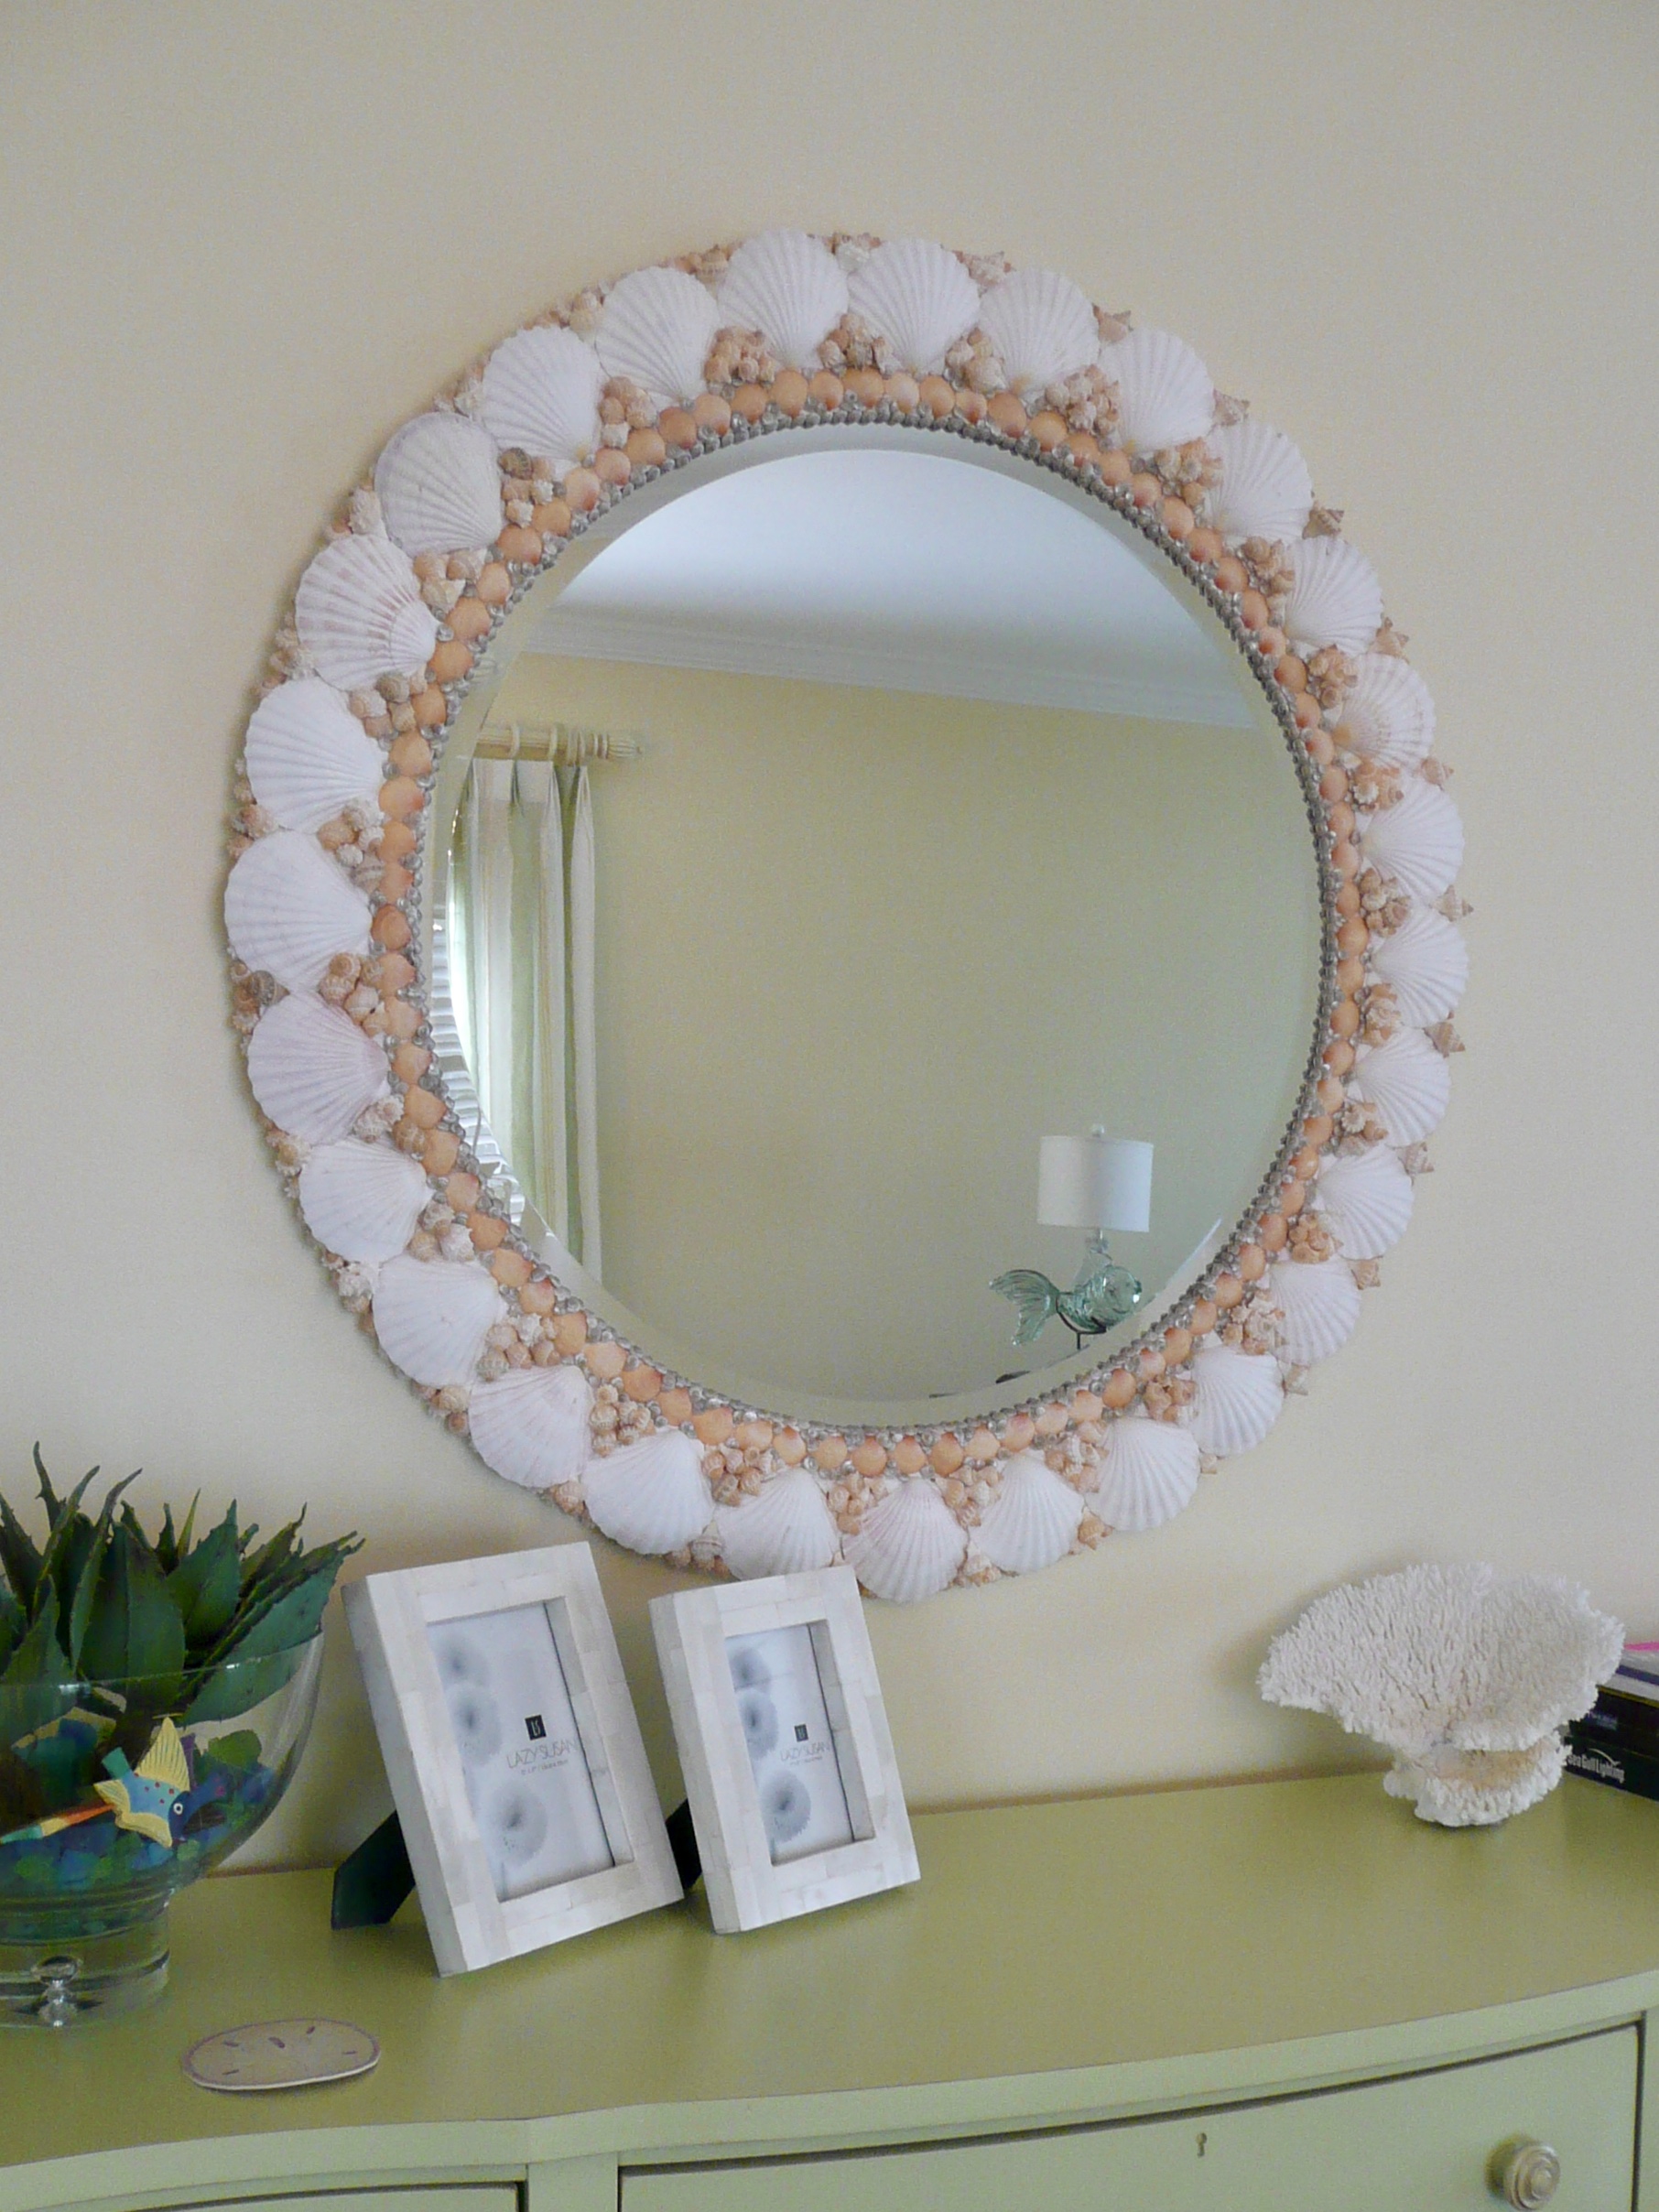 Large round shell mirror with white shells trimmed with peach colored shells along the inside edge hangs over a buffet table painted green.